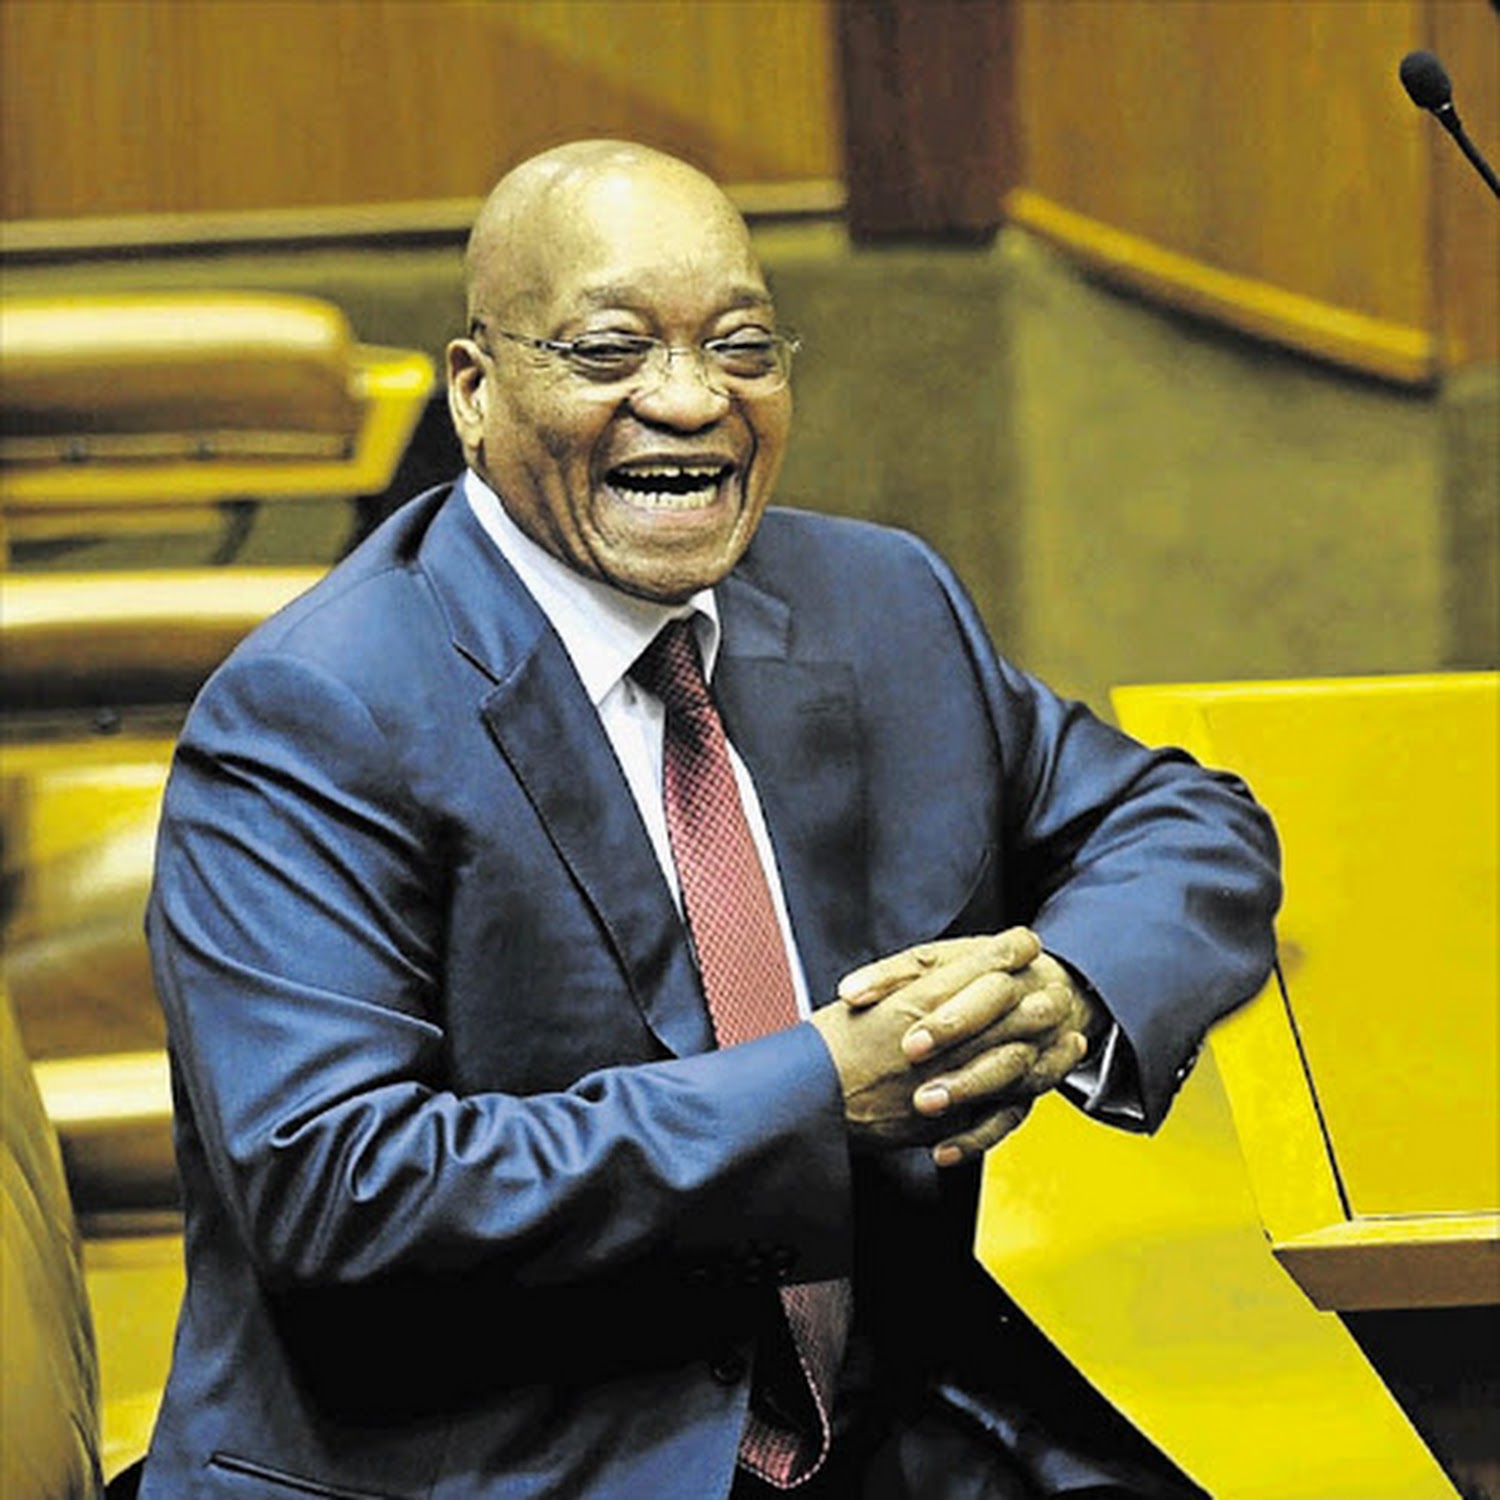 South African Leaders Seek Creative Solutions to Spare Jacob Zuma from Jail- It’s a tough call